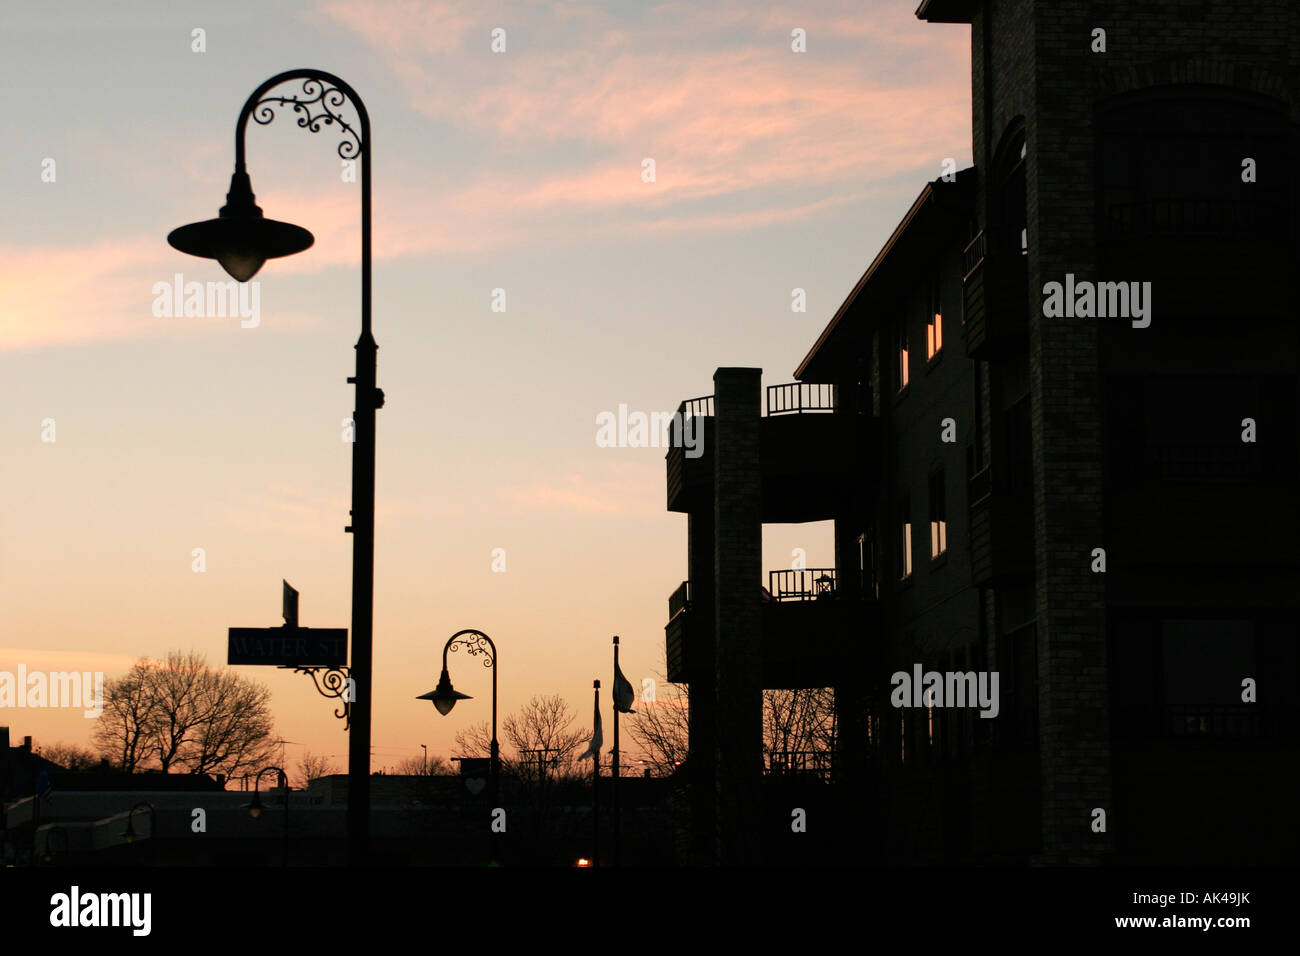 Street light pole and signs in a village center Stock Photo